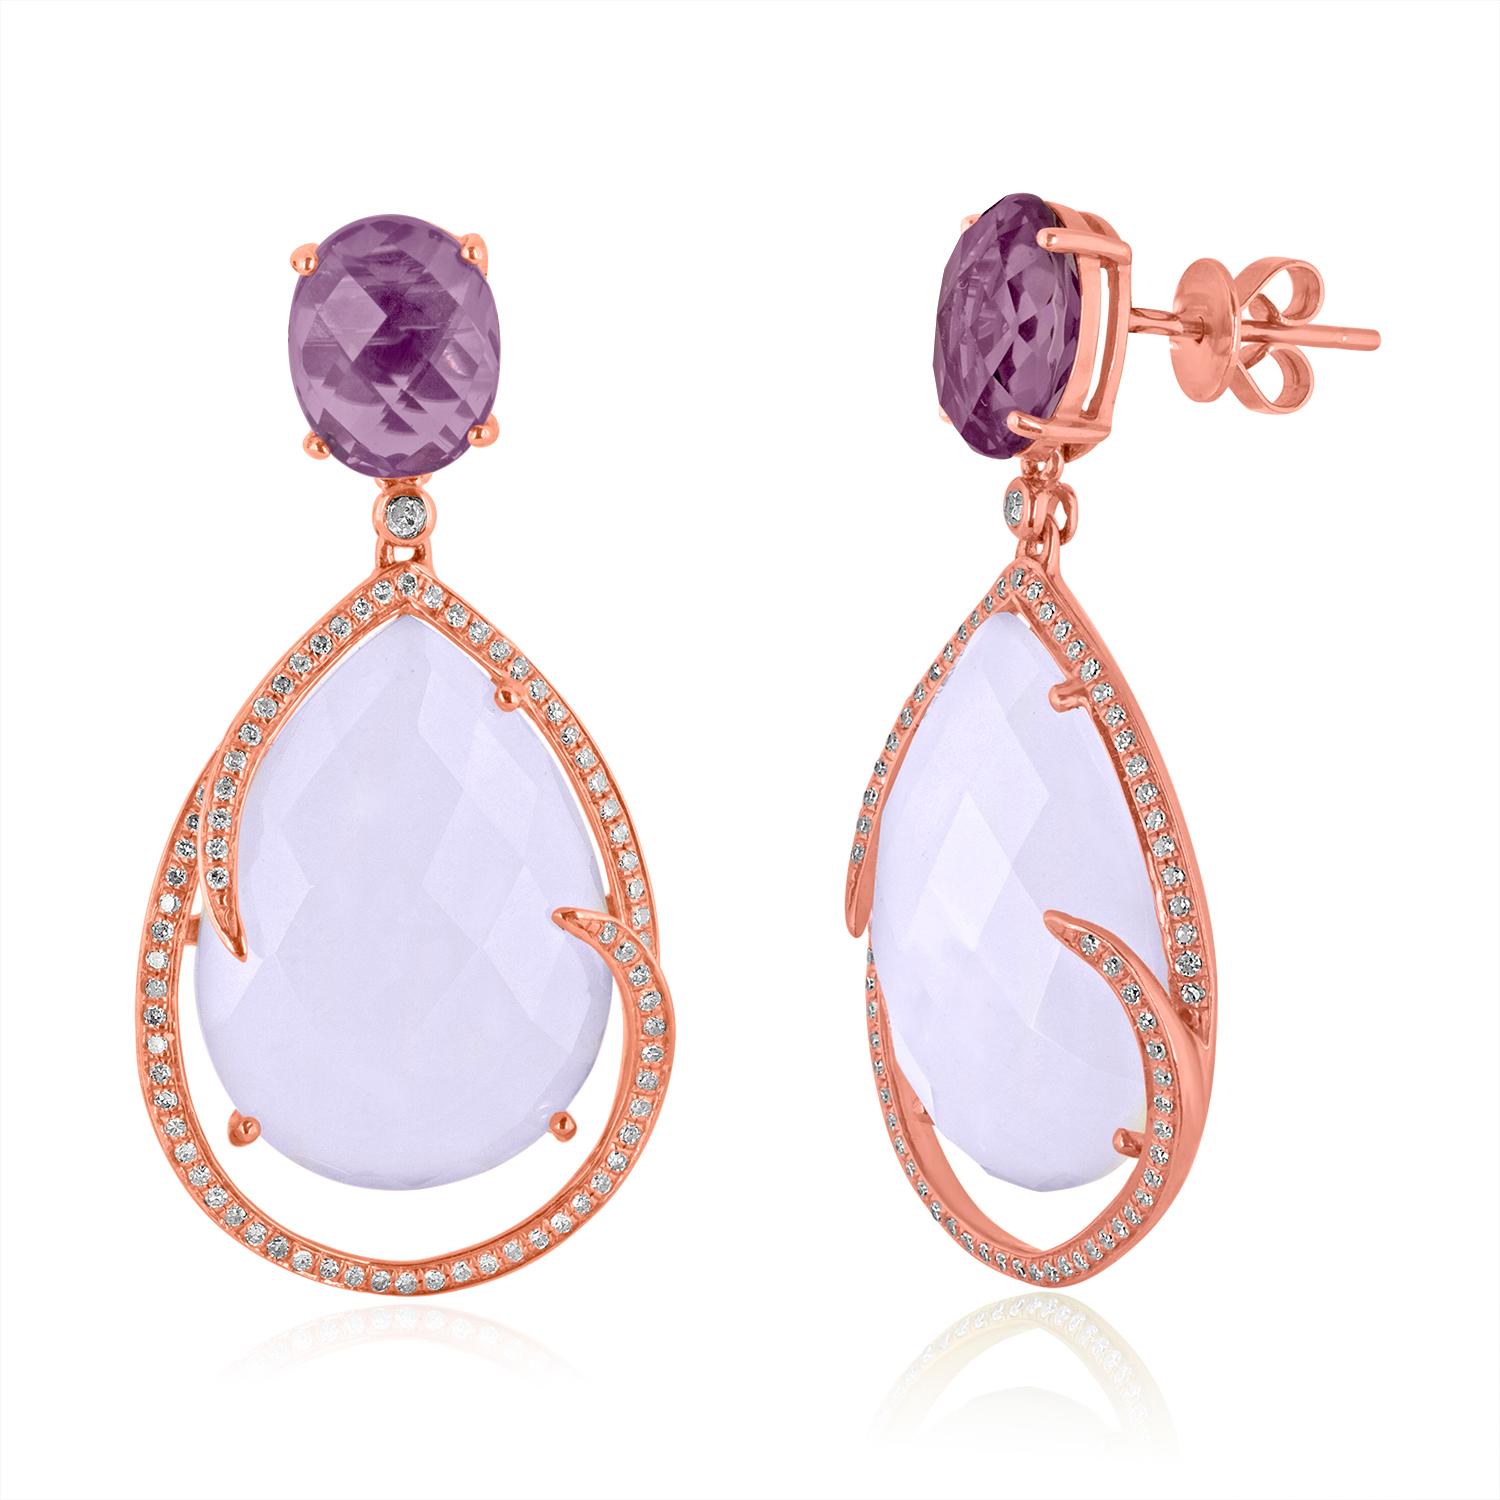 Very Beautiful Amethyst & Chalcedony Earrings accented with romantic Diamond Halo
The earrings are 14K Rose Gold
Amethyst 5.15Ct
Chalcedony 26.63Ct
Diamonds 0.47Ct H SI
They measure 1.5